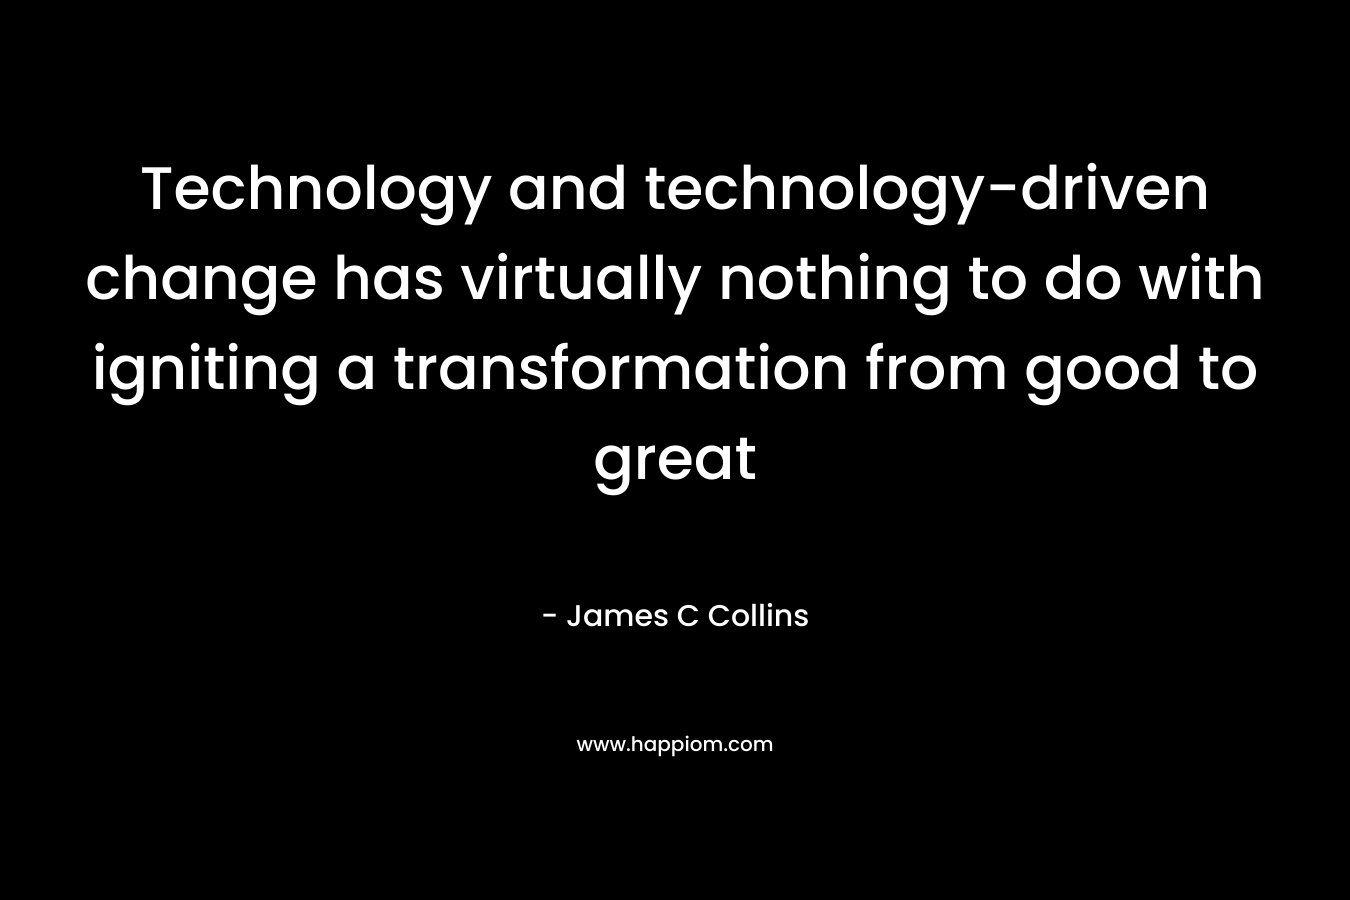 Technology and technology-driven change has virtually nothing to do with igniting a transformation from good to great